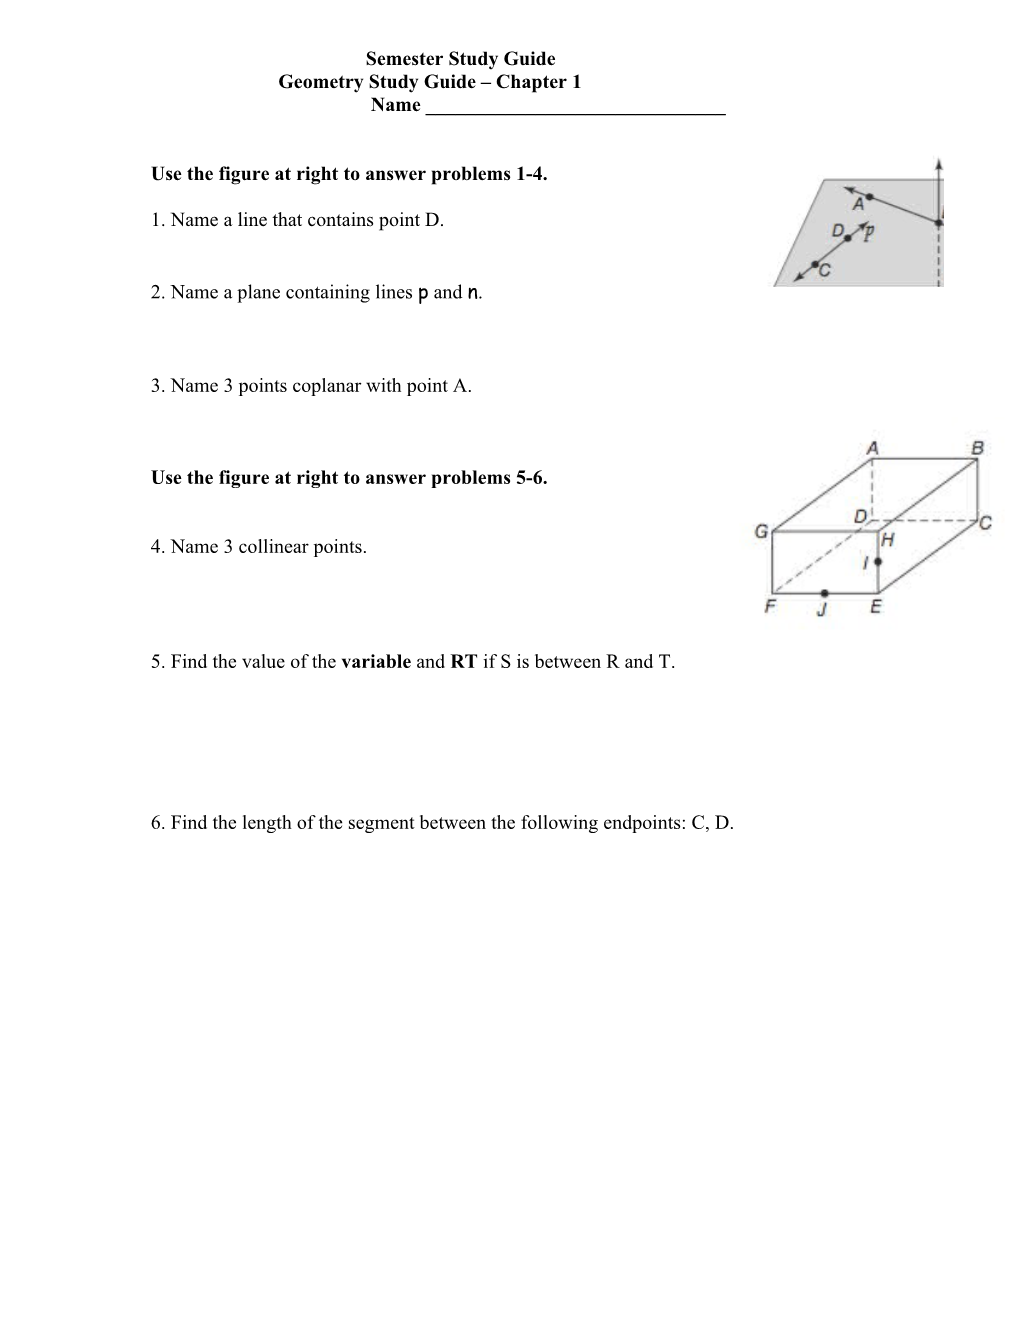 Geometry Study Guide Chapter 1